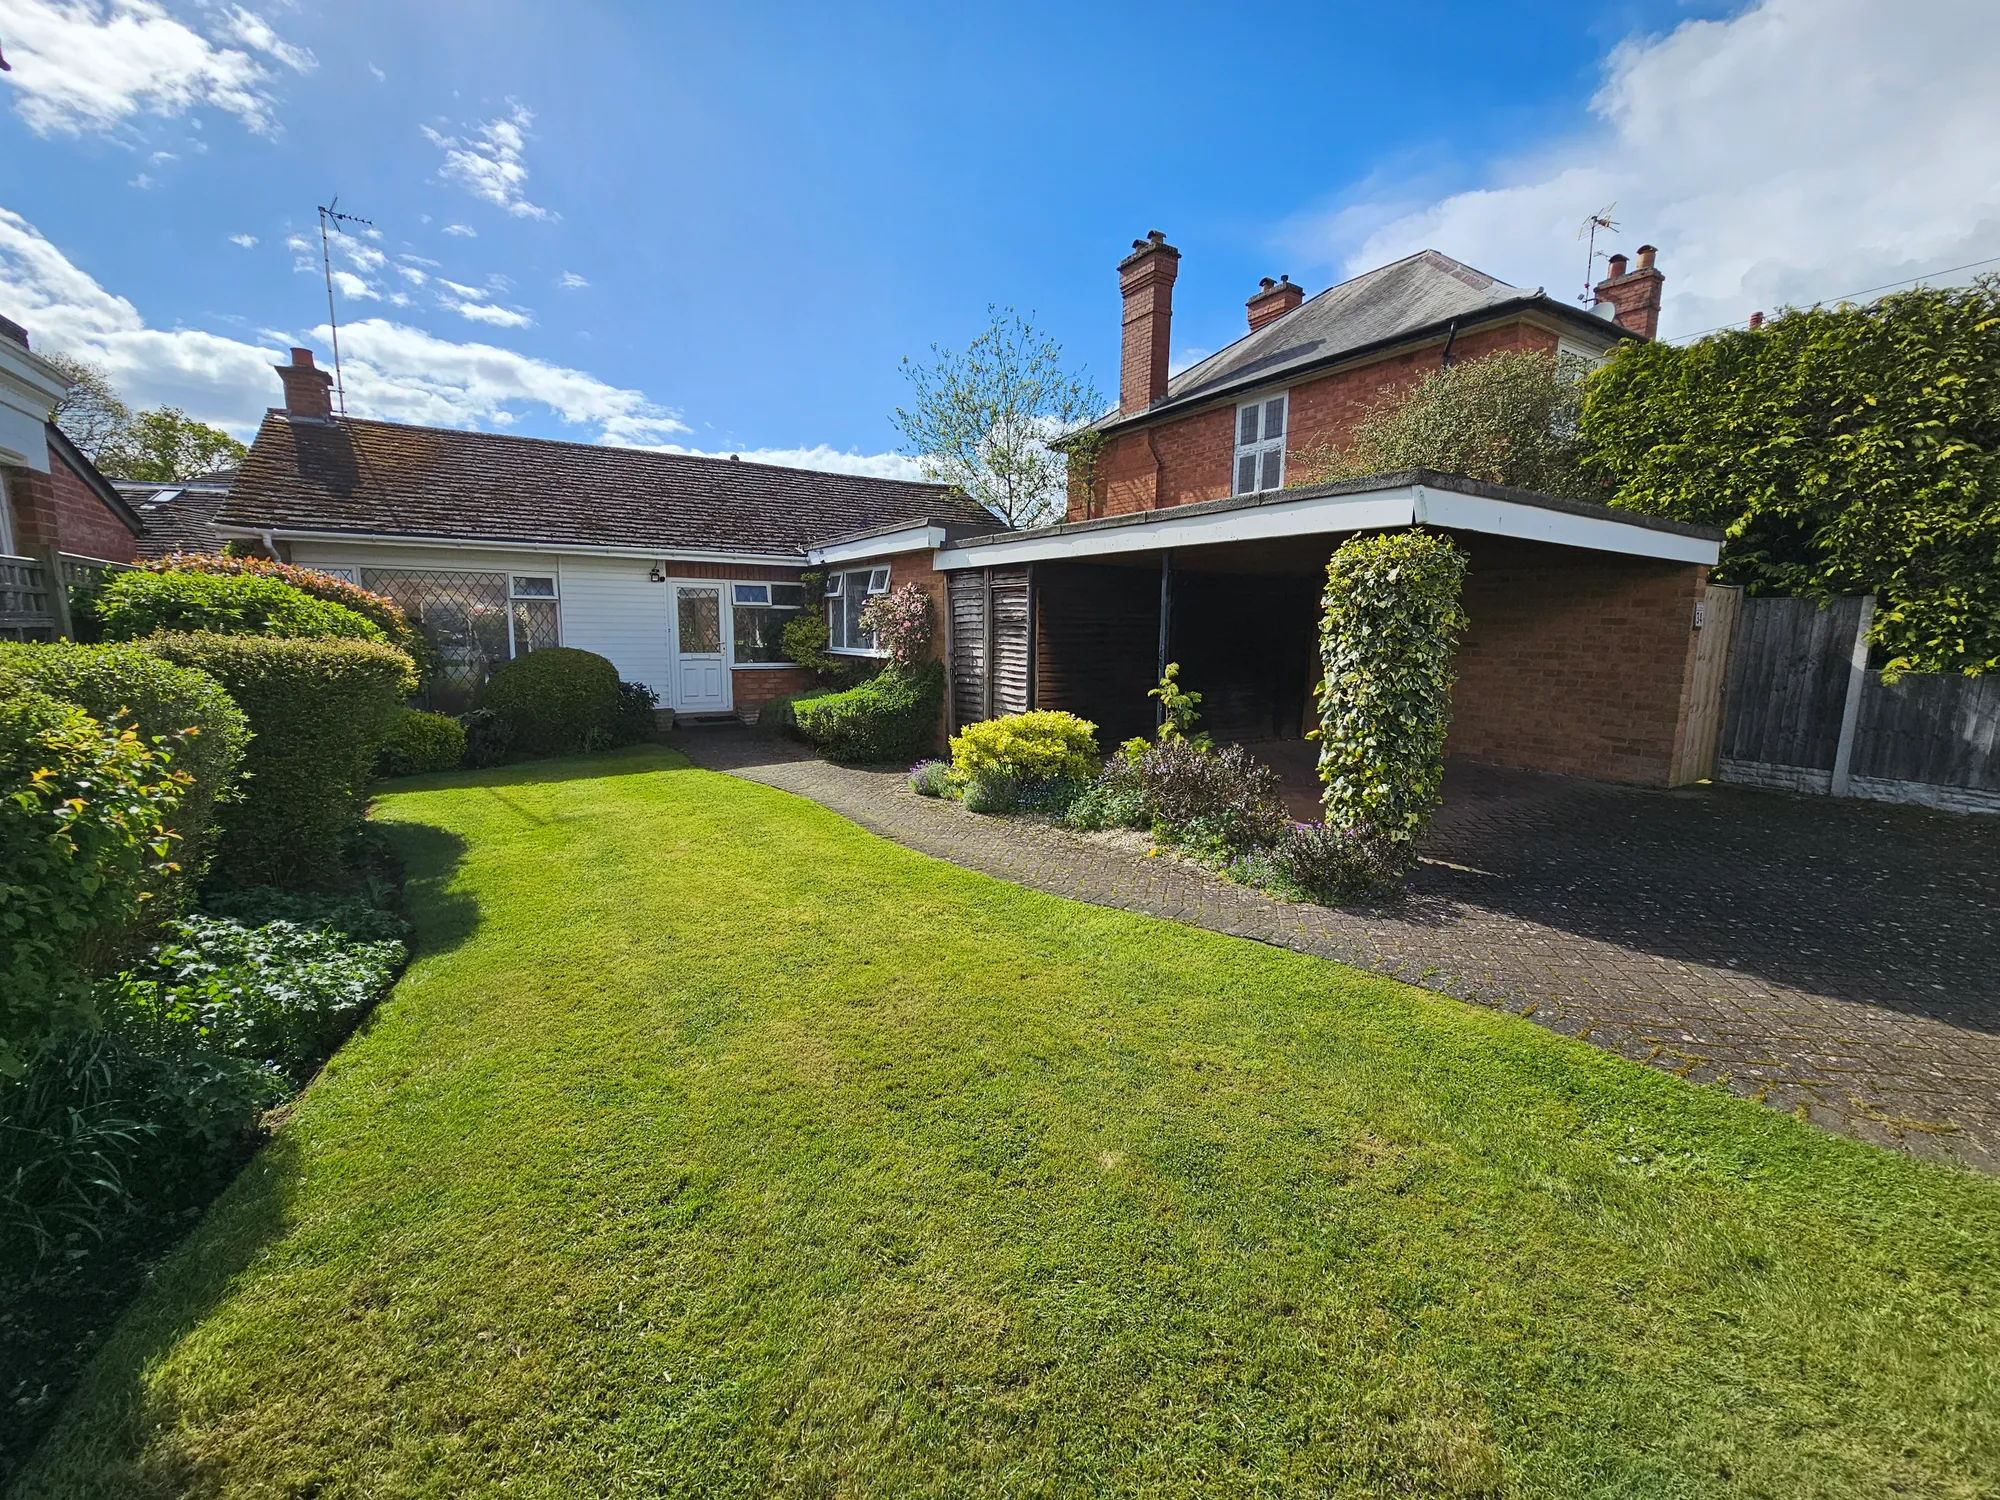 2 bed detached bungalow to rent in Southbank Road, Kenilworth - Property Image 1